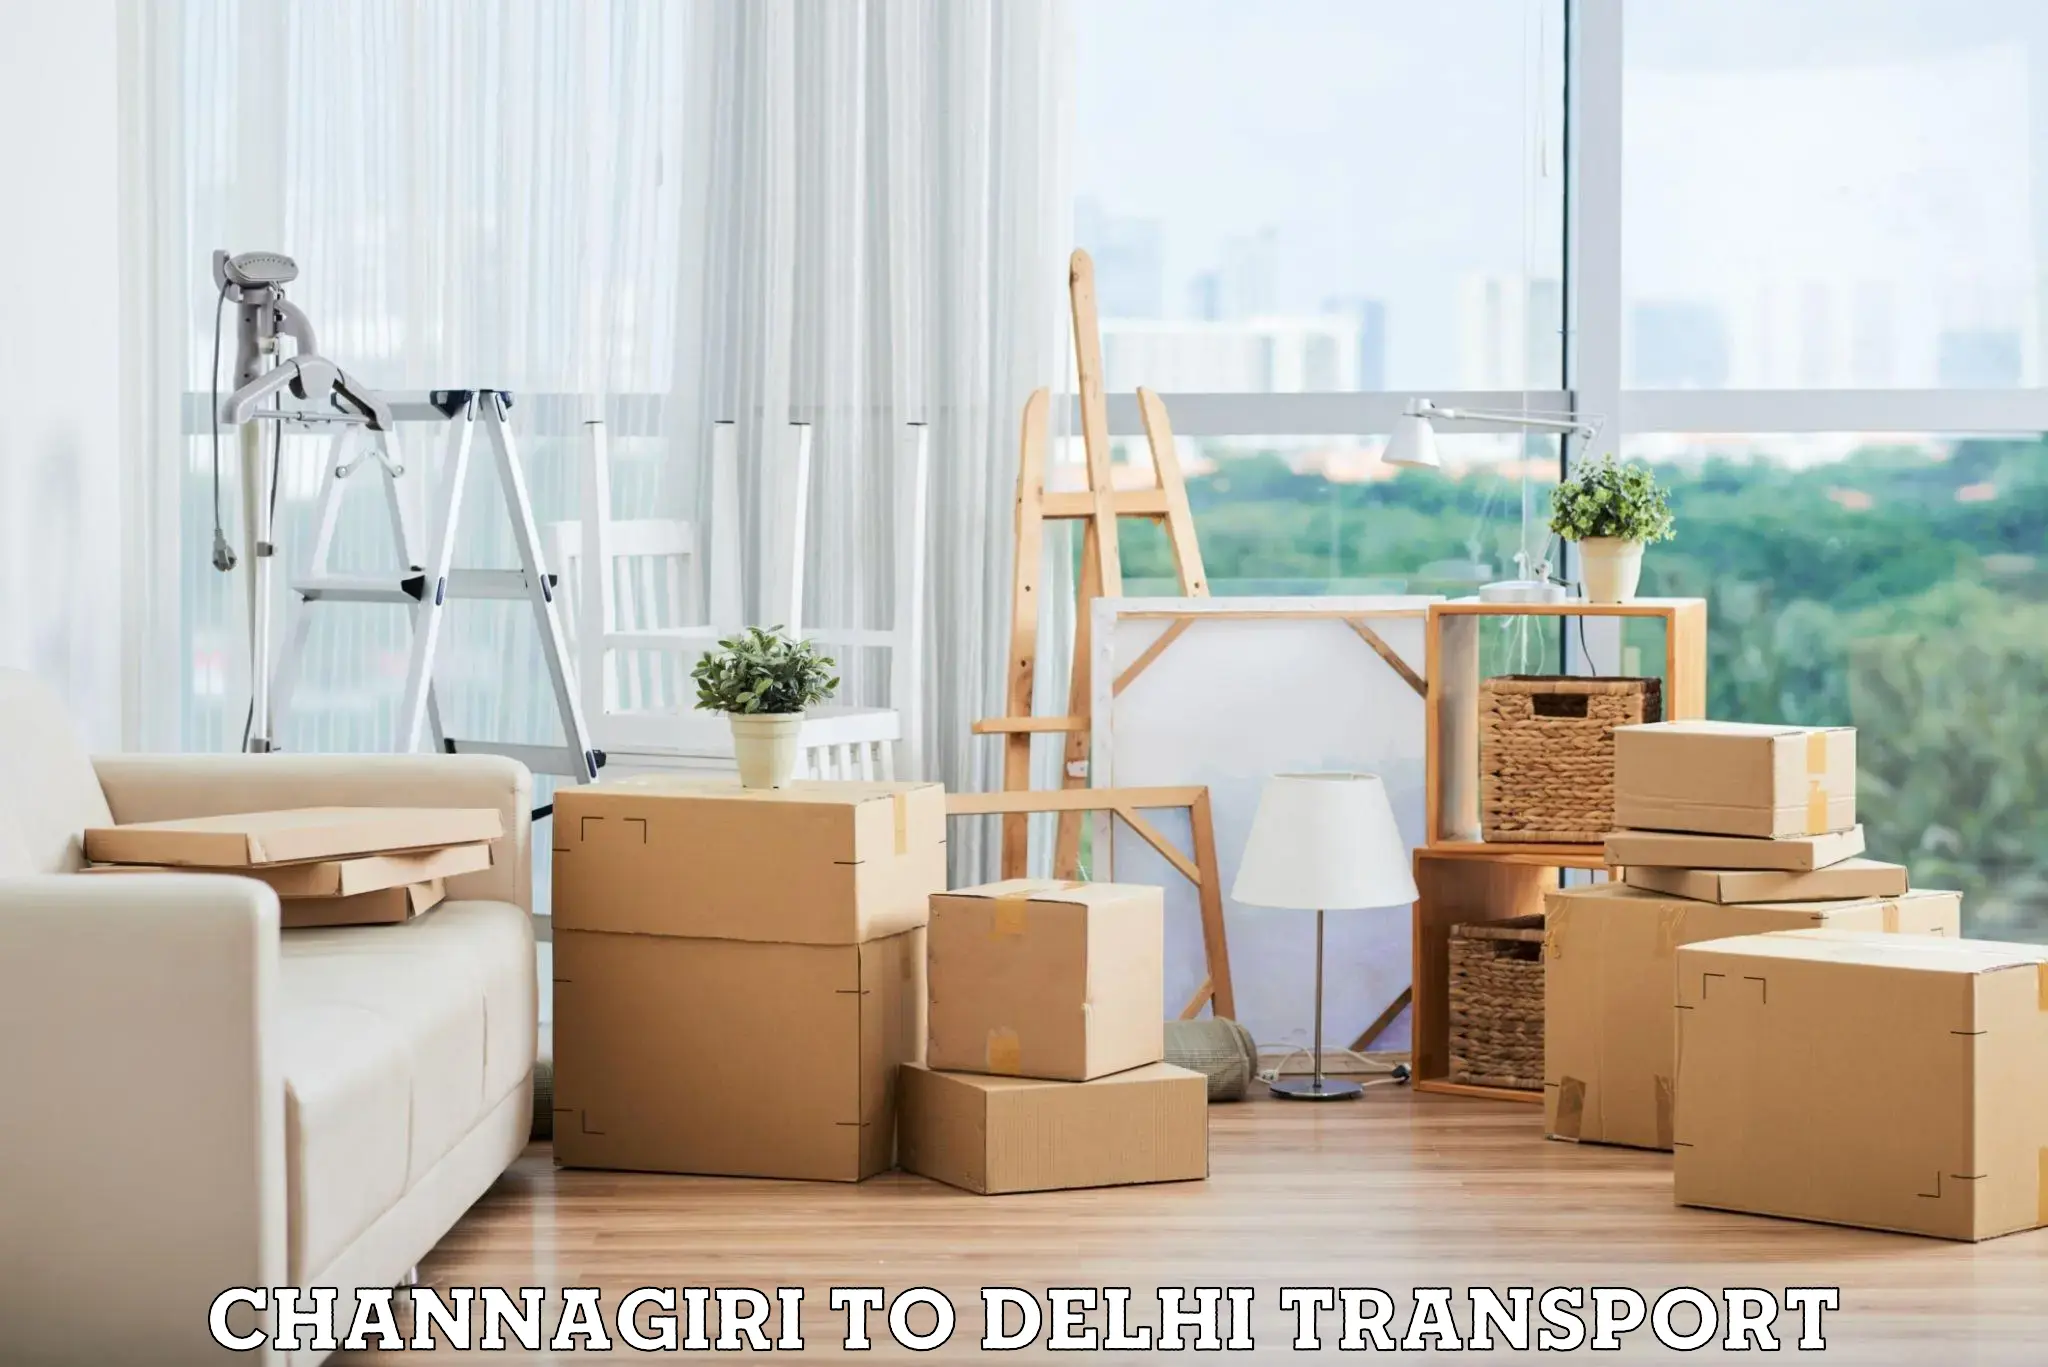 Goods delivery service Channagiri to East Delhi